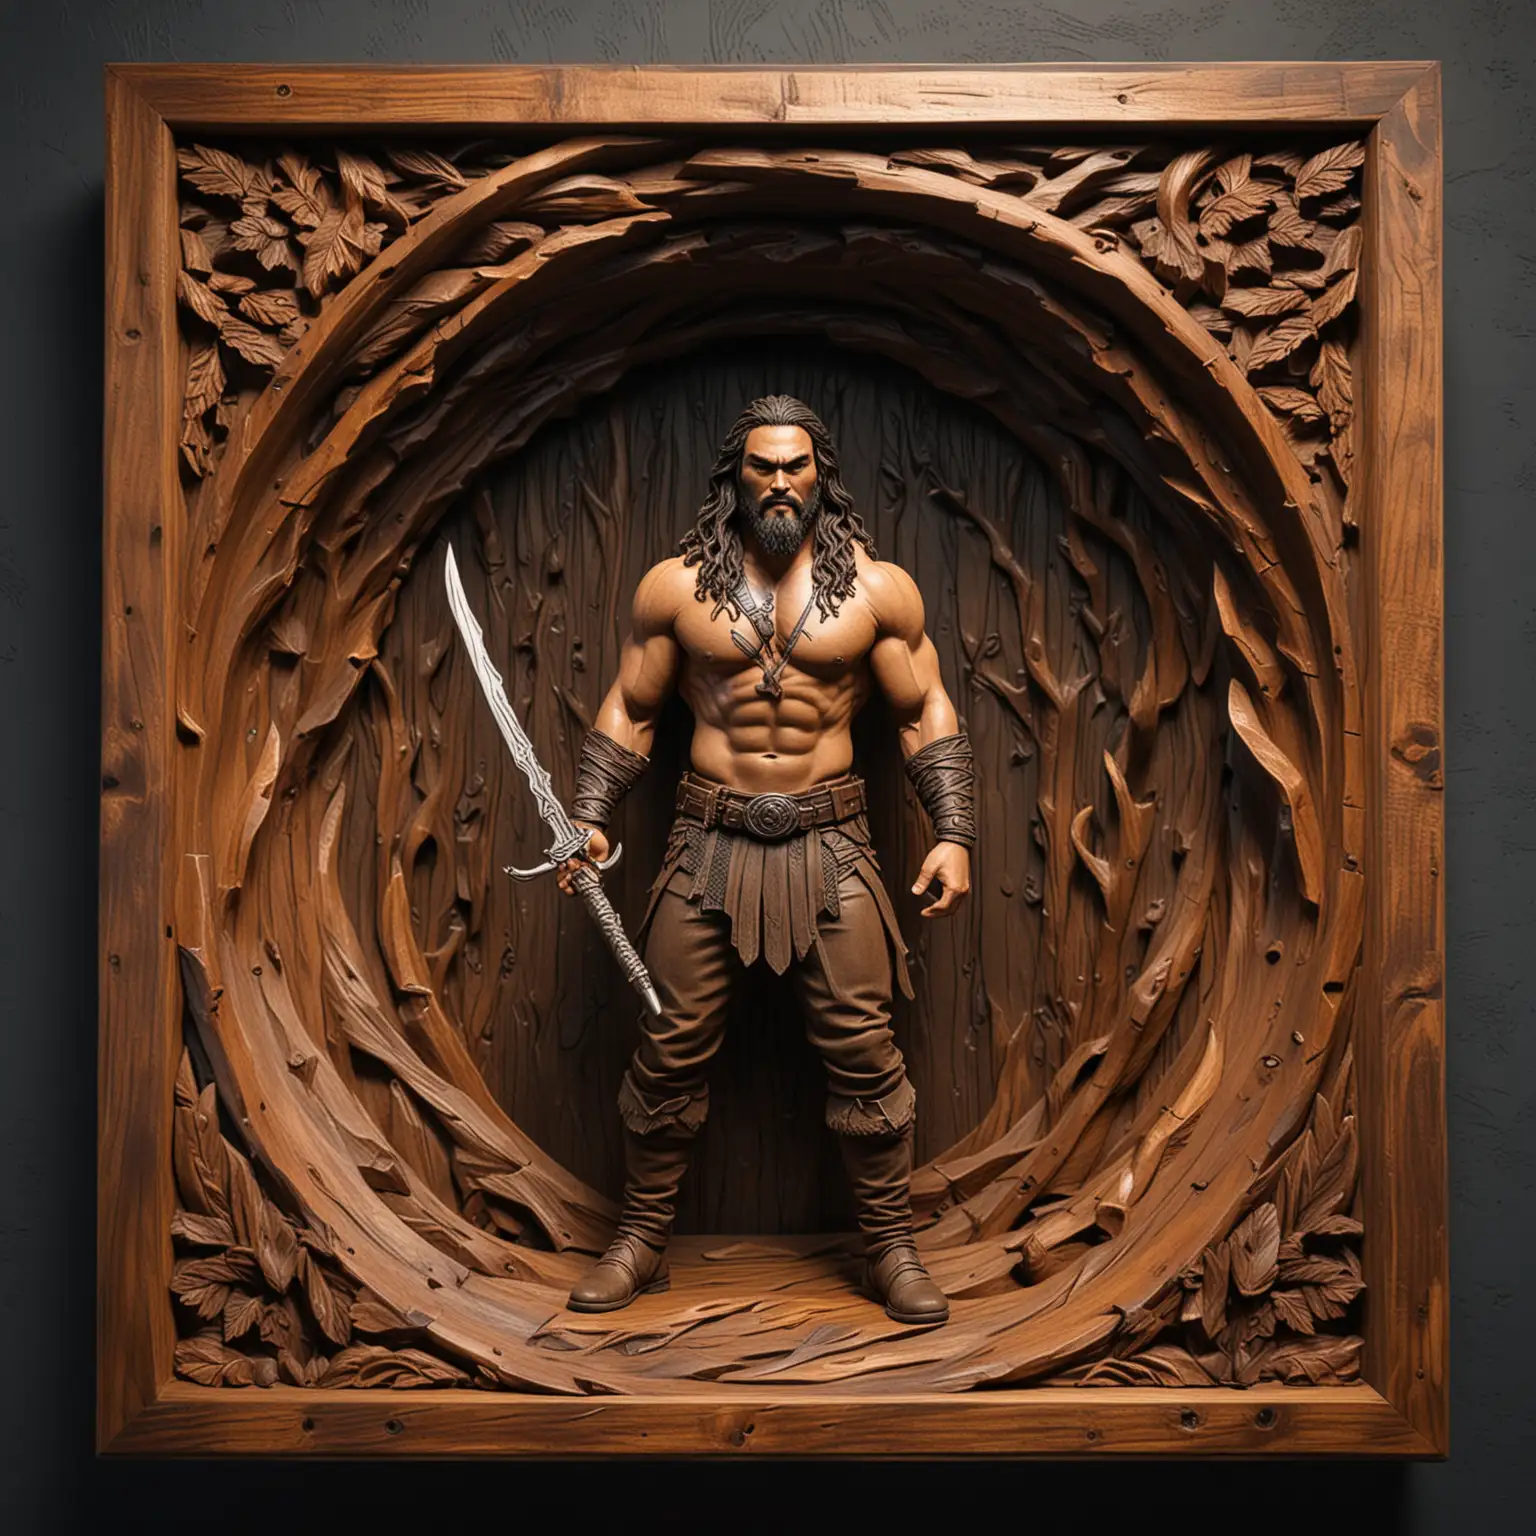 3D Carved Jason Momoa Statue in Tunnel with Sword